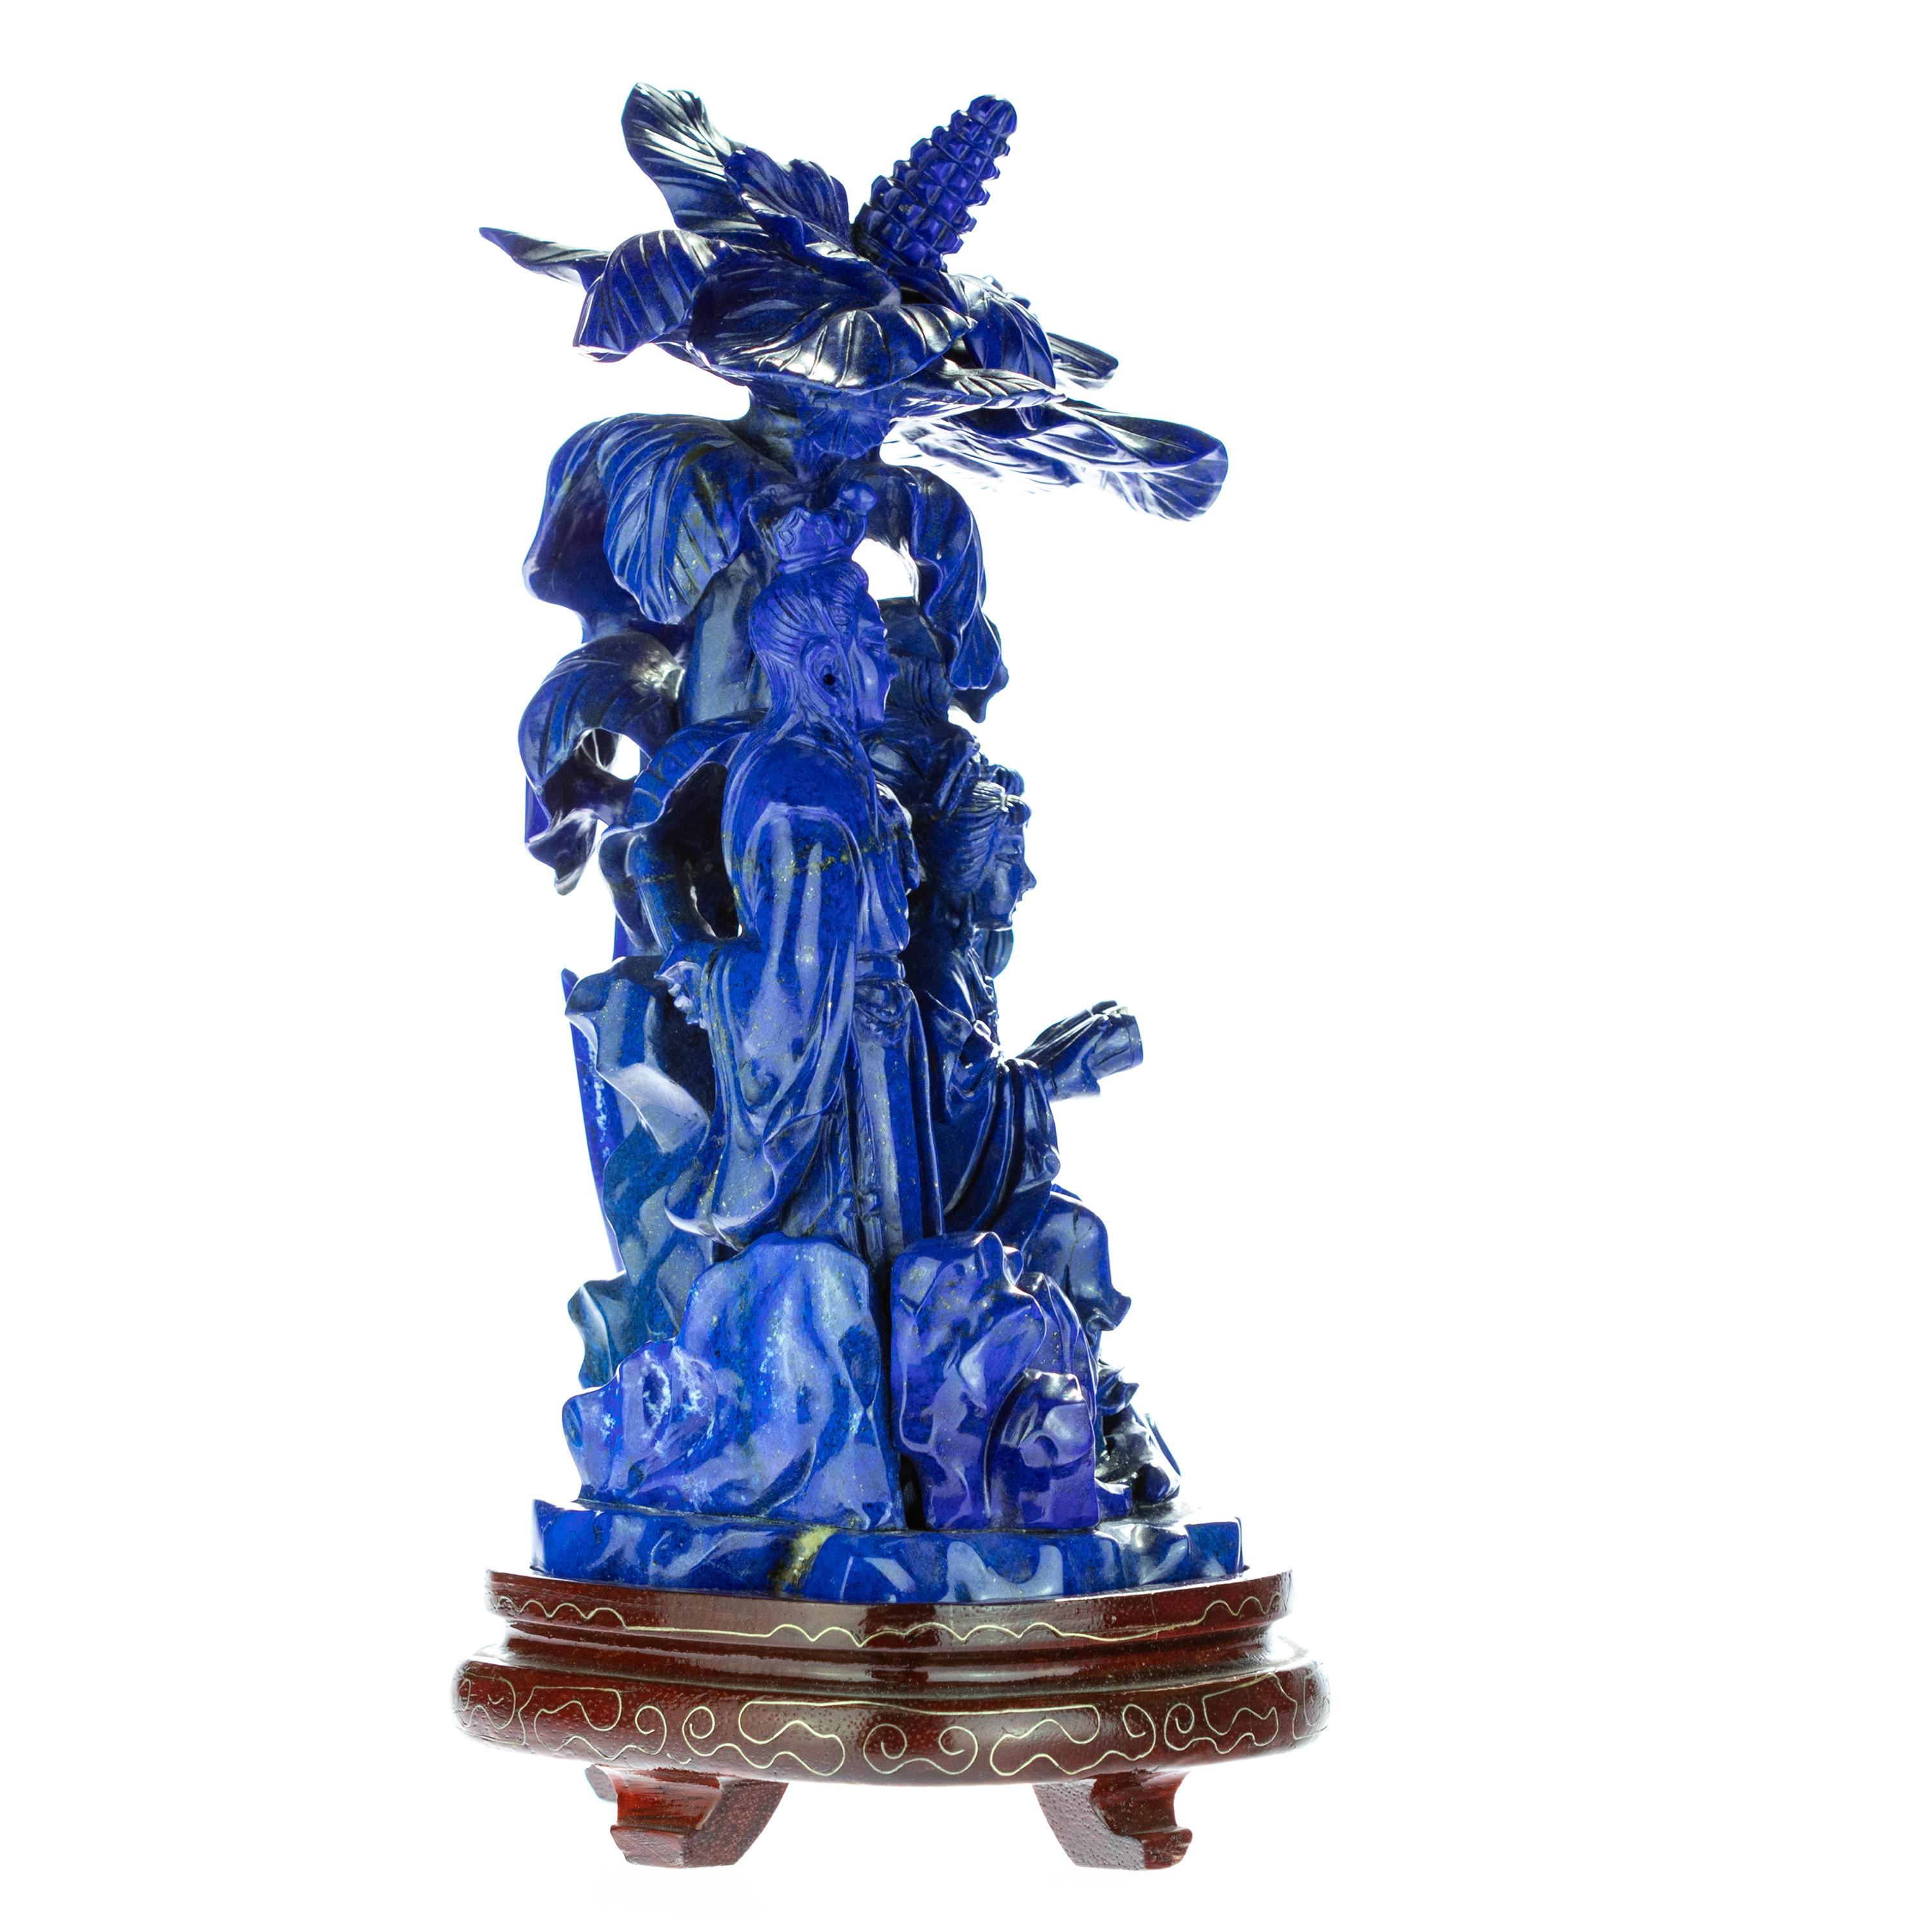 Hong Kong Lapis Lazuli Imperial Family Carved Flower Gemstone Asian Art Statue Sculpture For Sale